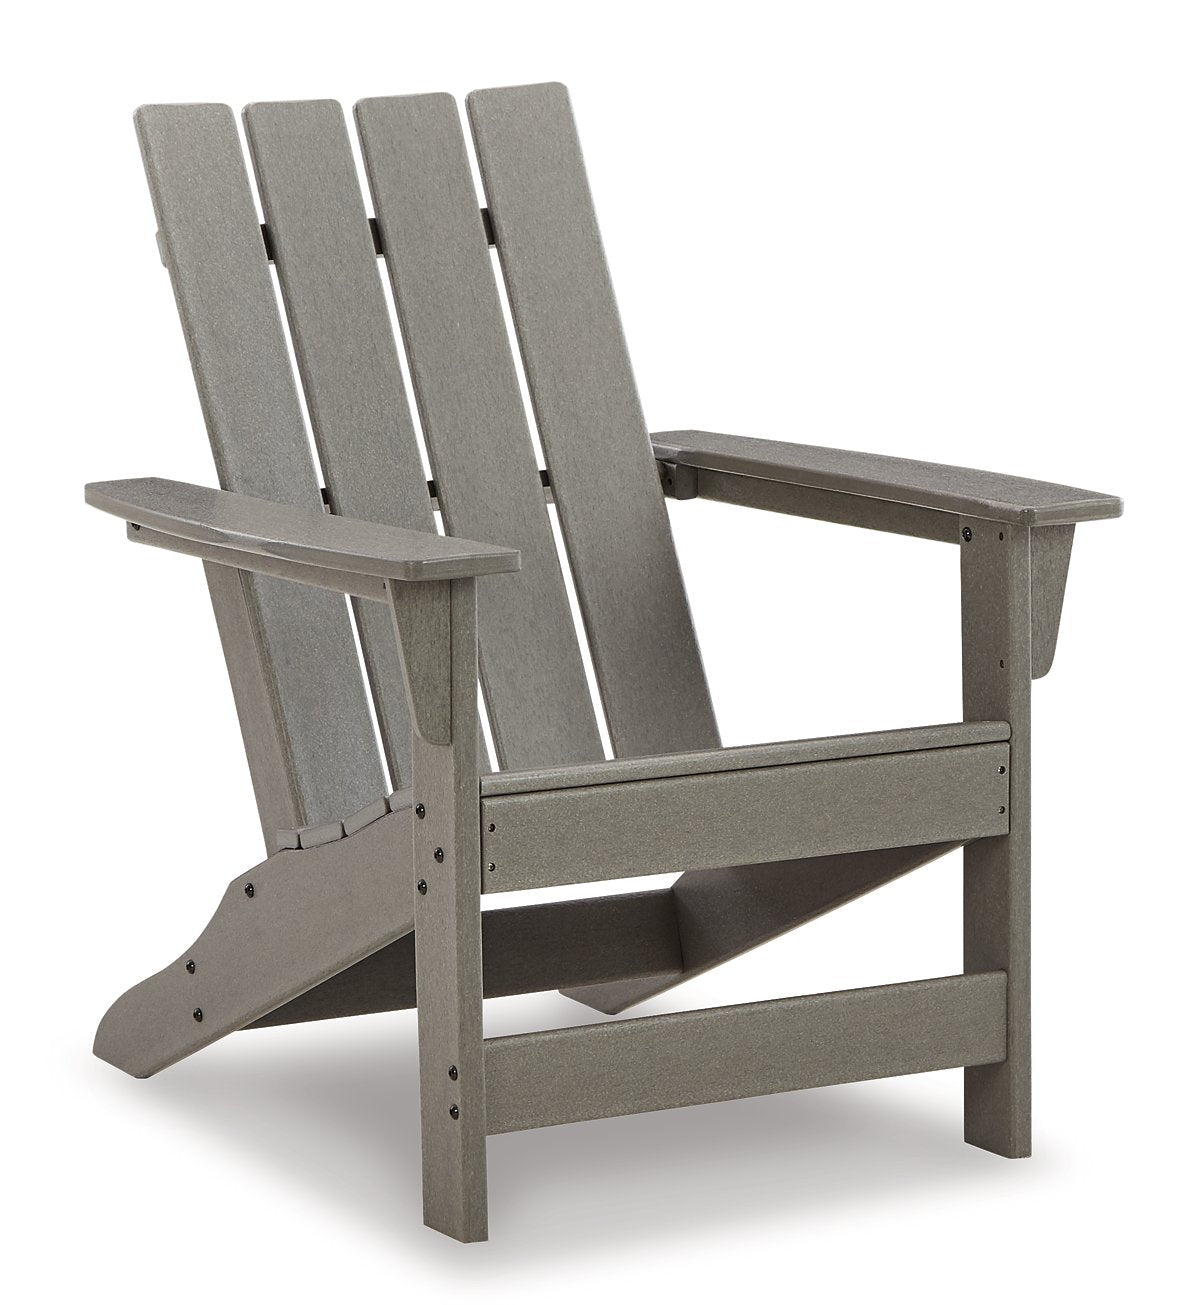 Visola Outdoor Adirondack Chair and End Table - Half Price Furniture